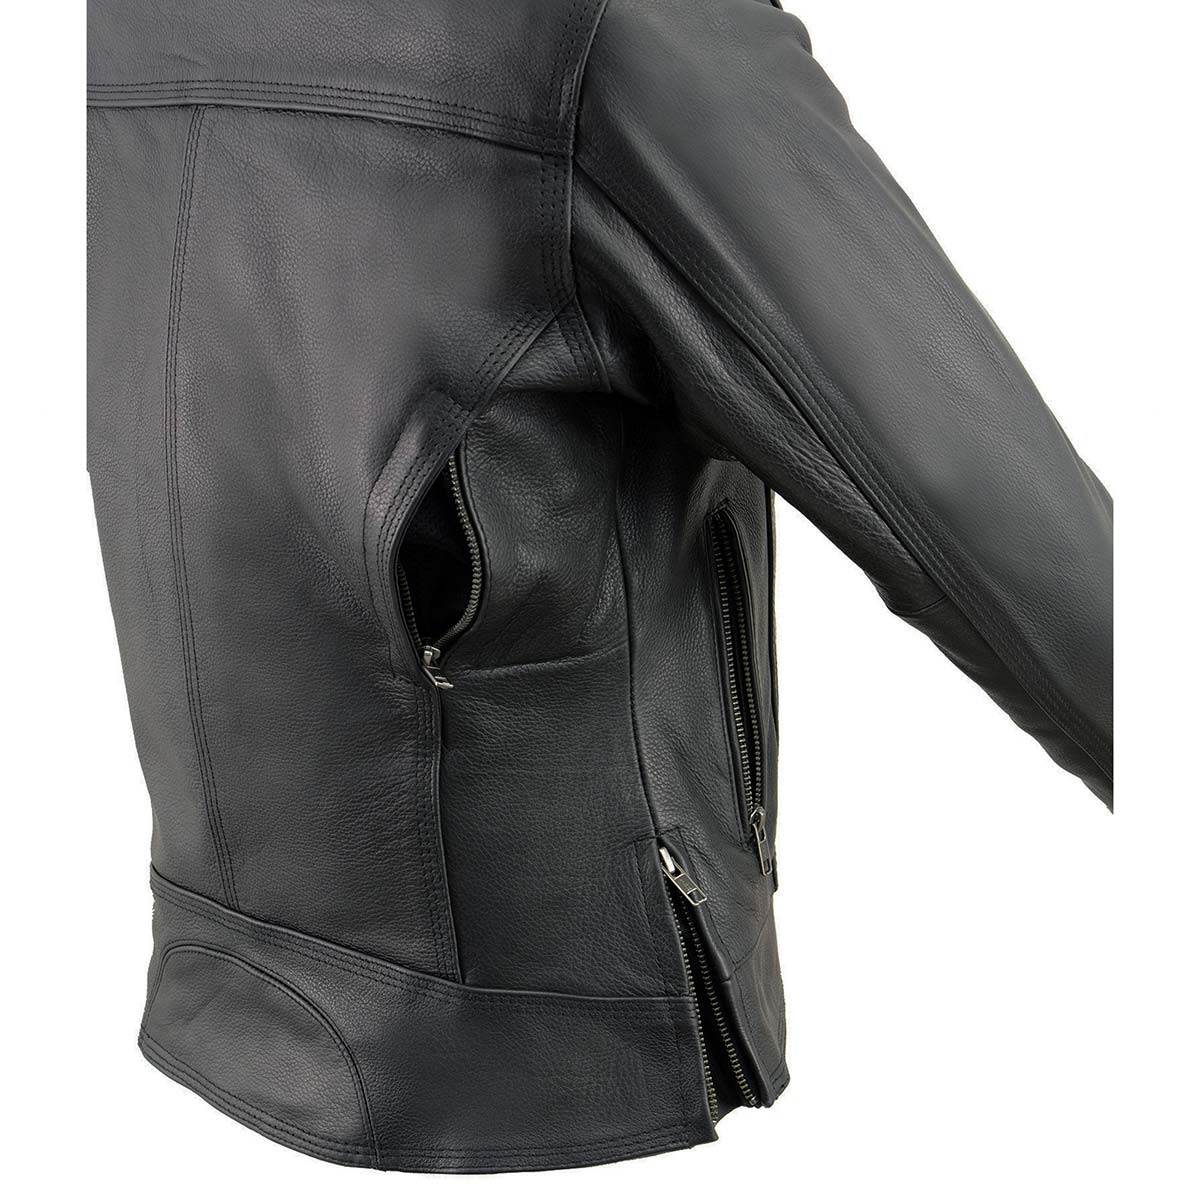 Milwaukee Leather MLL2552 Women's Black 'Cool-Tec' Leather Scooter Triple Stitch Jacket